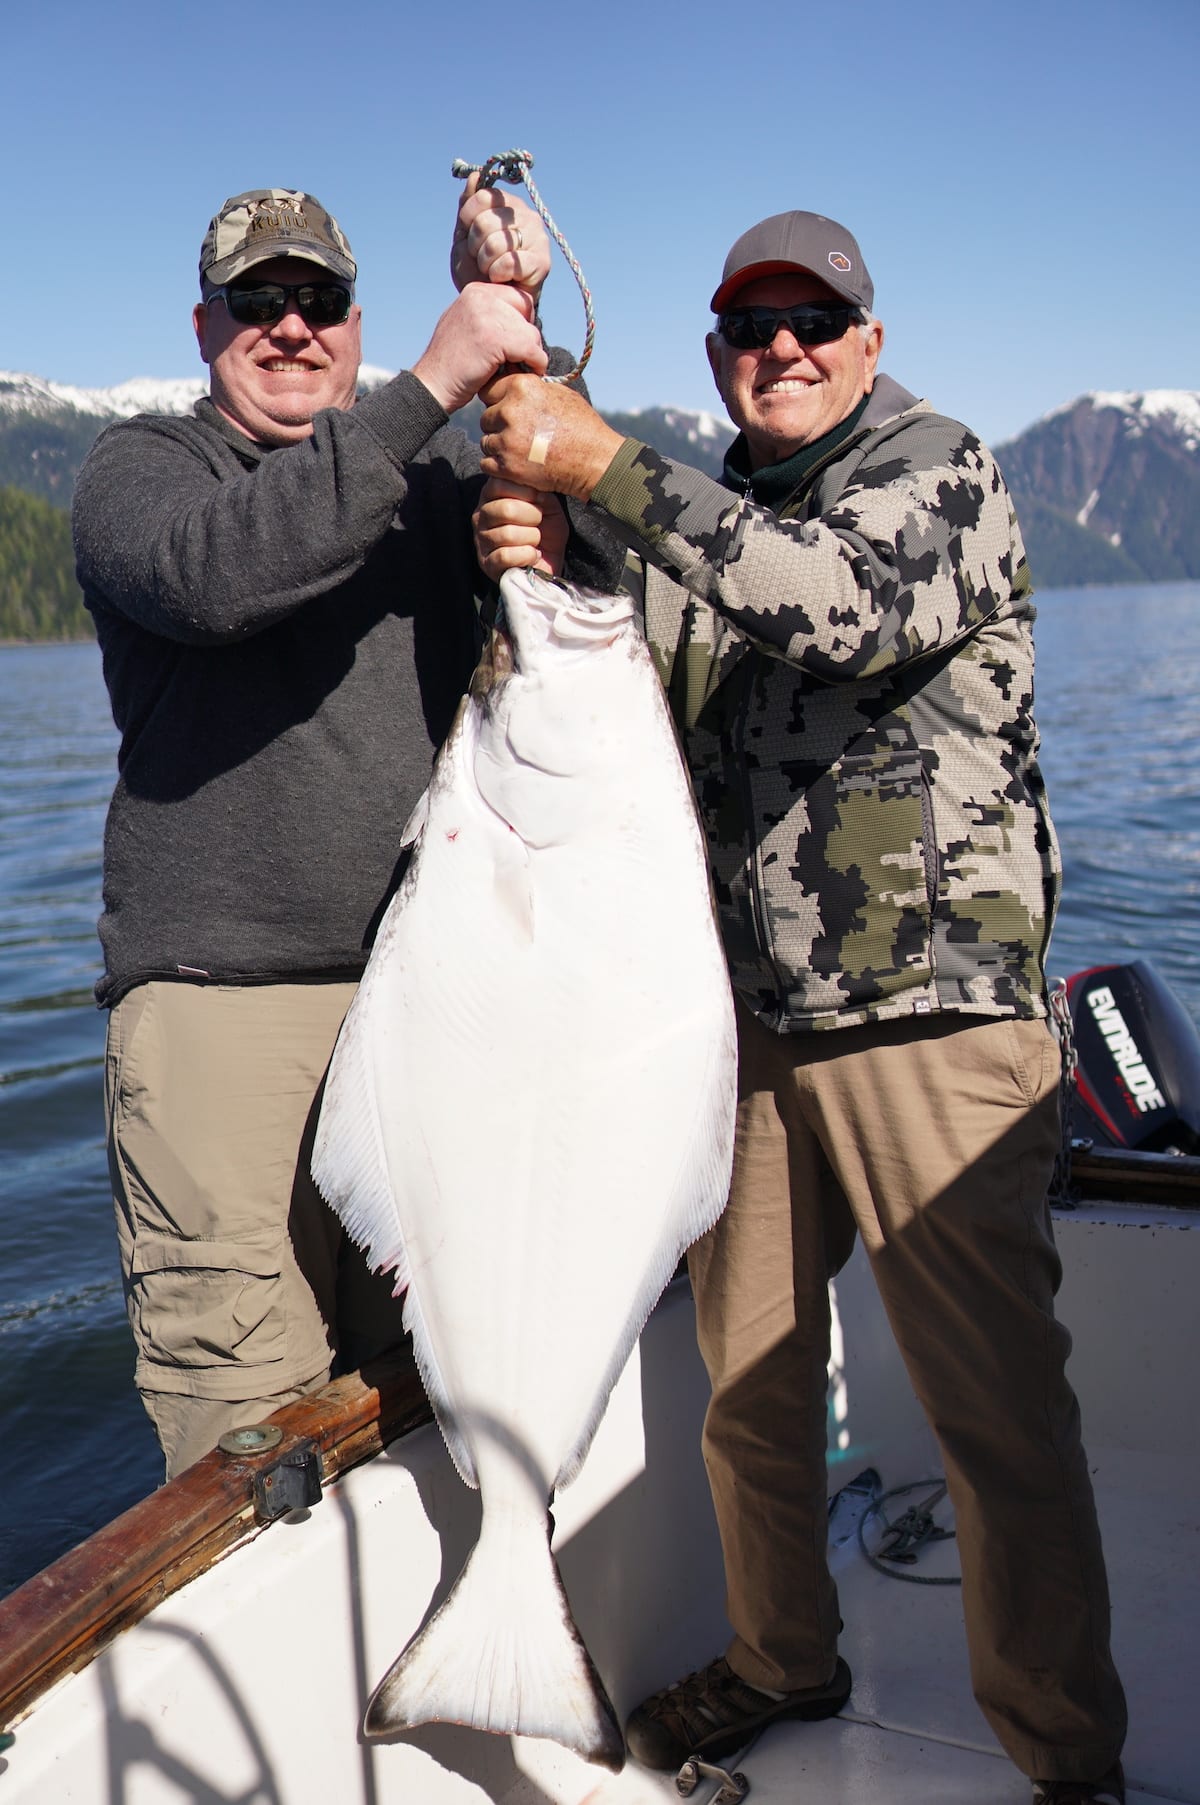 A little halibut fishing between glassing sessions.